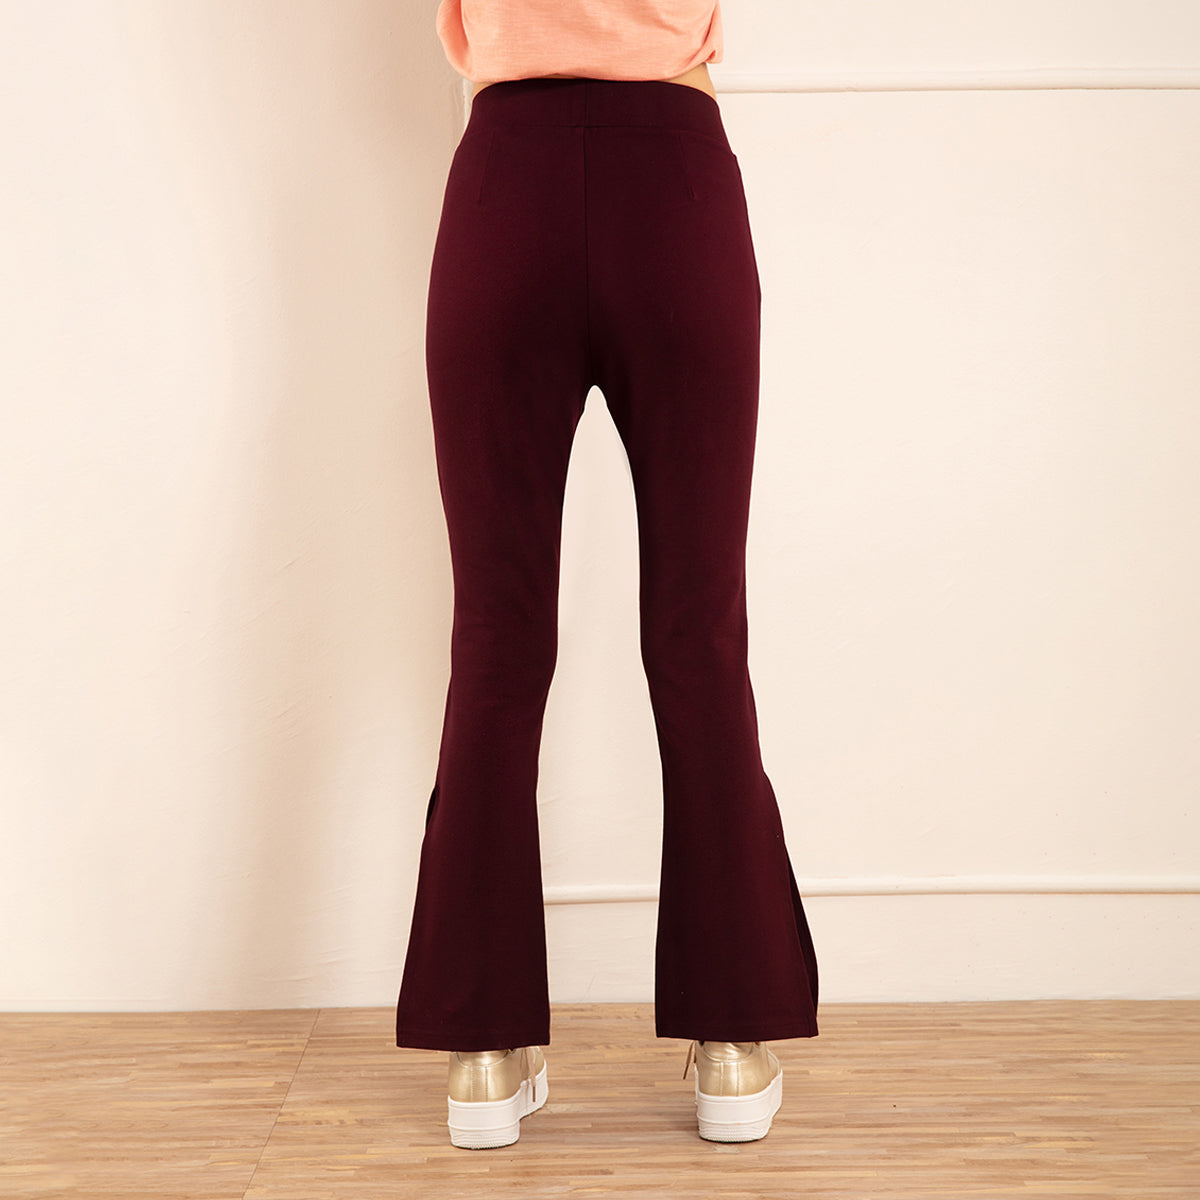 Nykd All Day High Waisted Flared Pants- NYAT234 Zinfandel